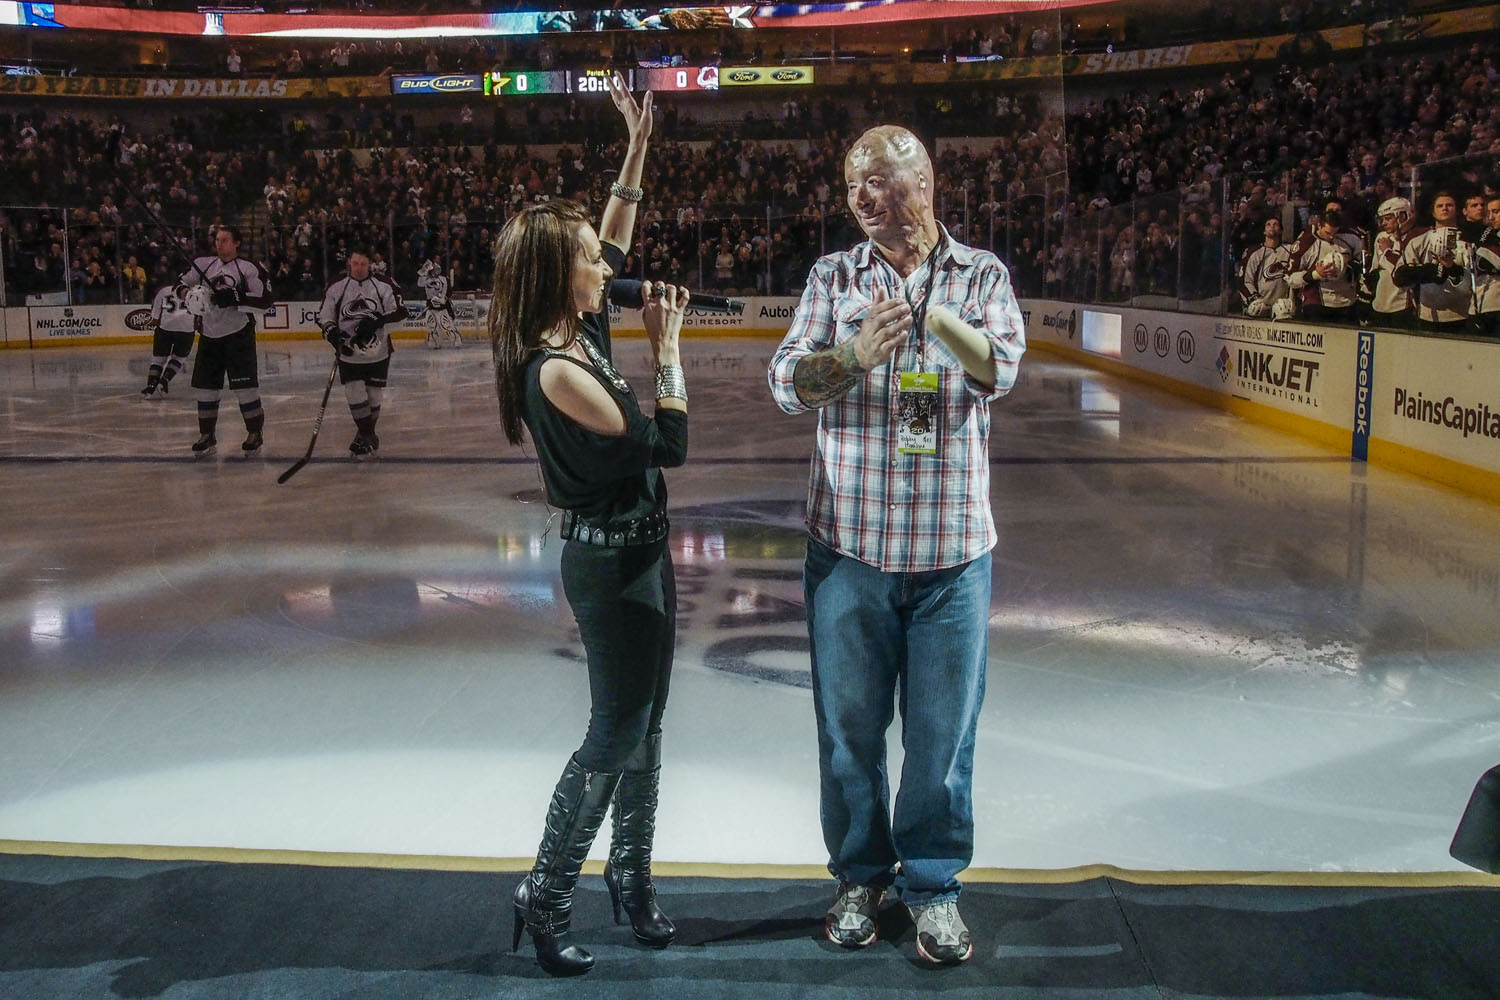 2013.  Dallas, TX.  USA.  Bobby on ice with singer Celine Ray after the national anthem.  He was the center of Military Appreciation night for the Dallas Stars NHL team.  Bobby Henline, 41, veteran of four tours to Iraq and sole survivor of an IED blast that killed the other four soldiers in his humvee in Iraq in 2007.  He is now a standup comedian launching a new career with a routine built around his injuries.  He received burns over 38% of his body in the blast.